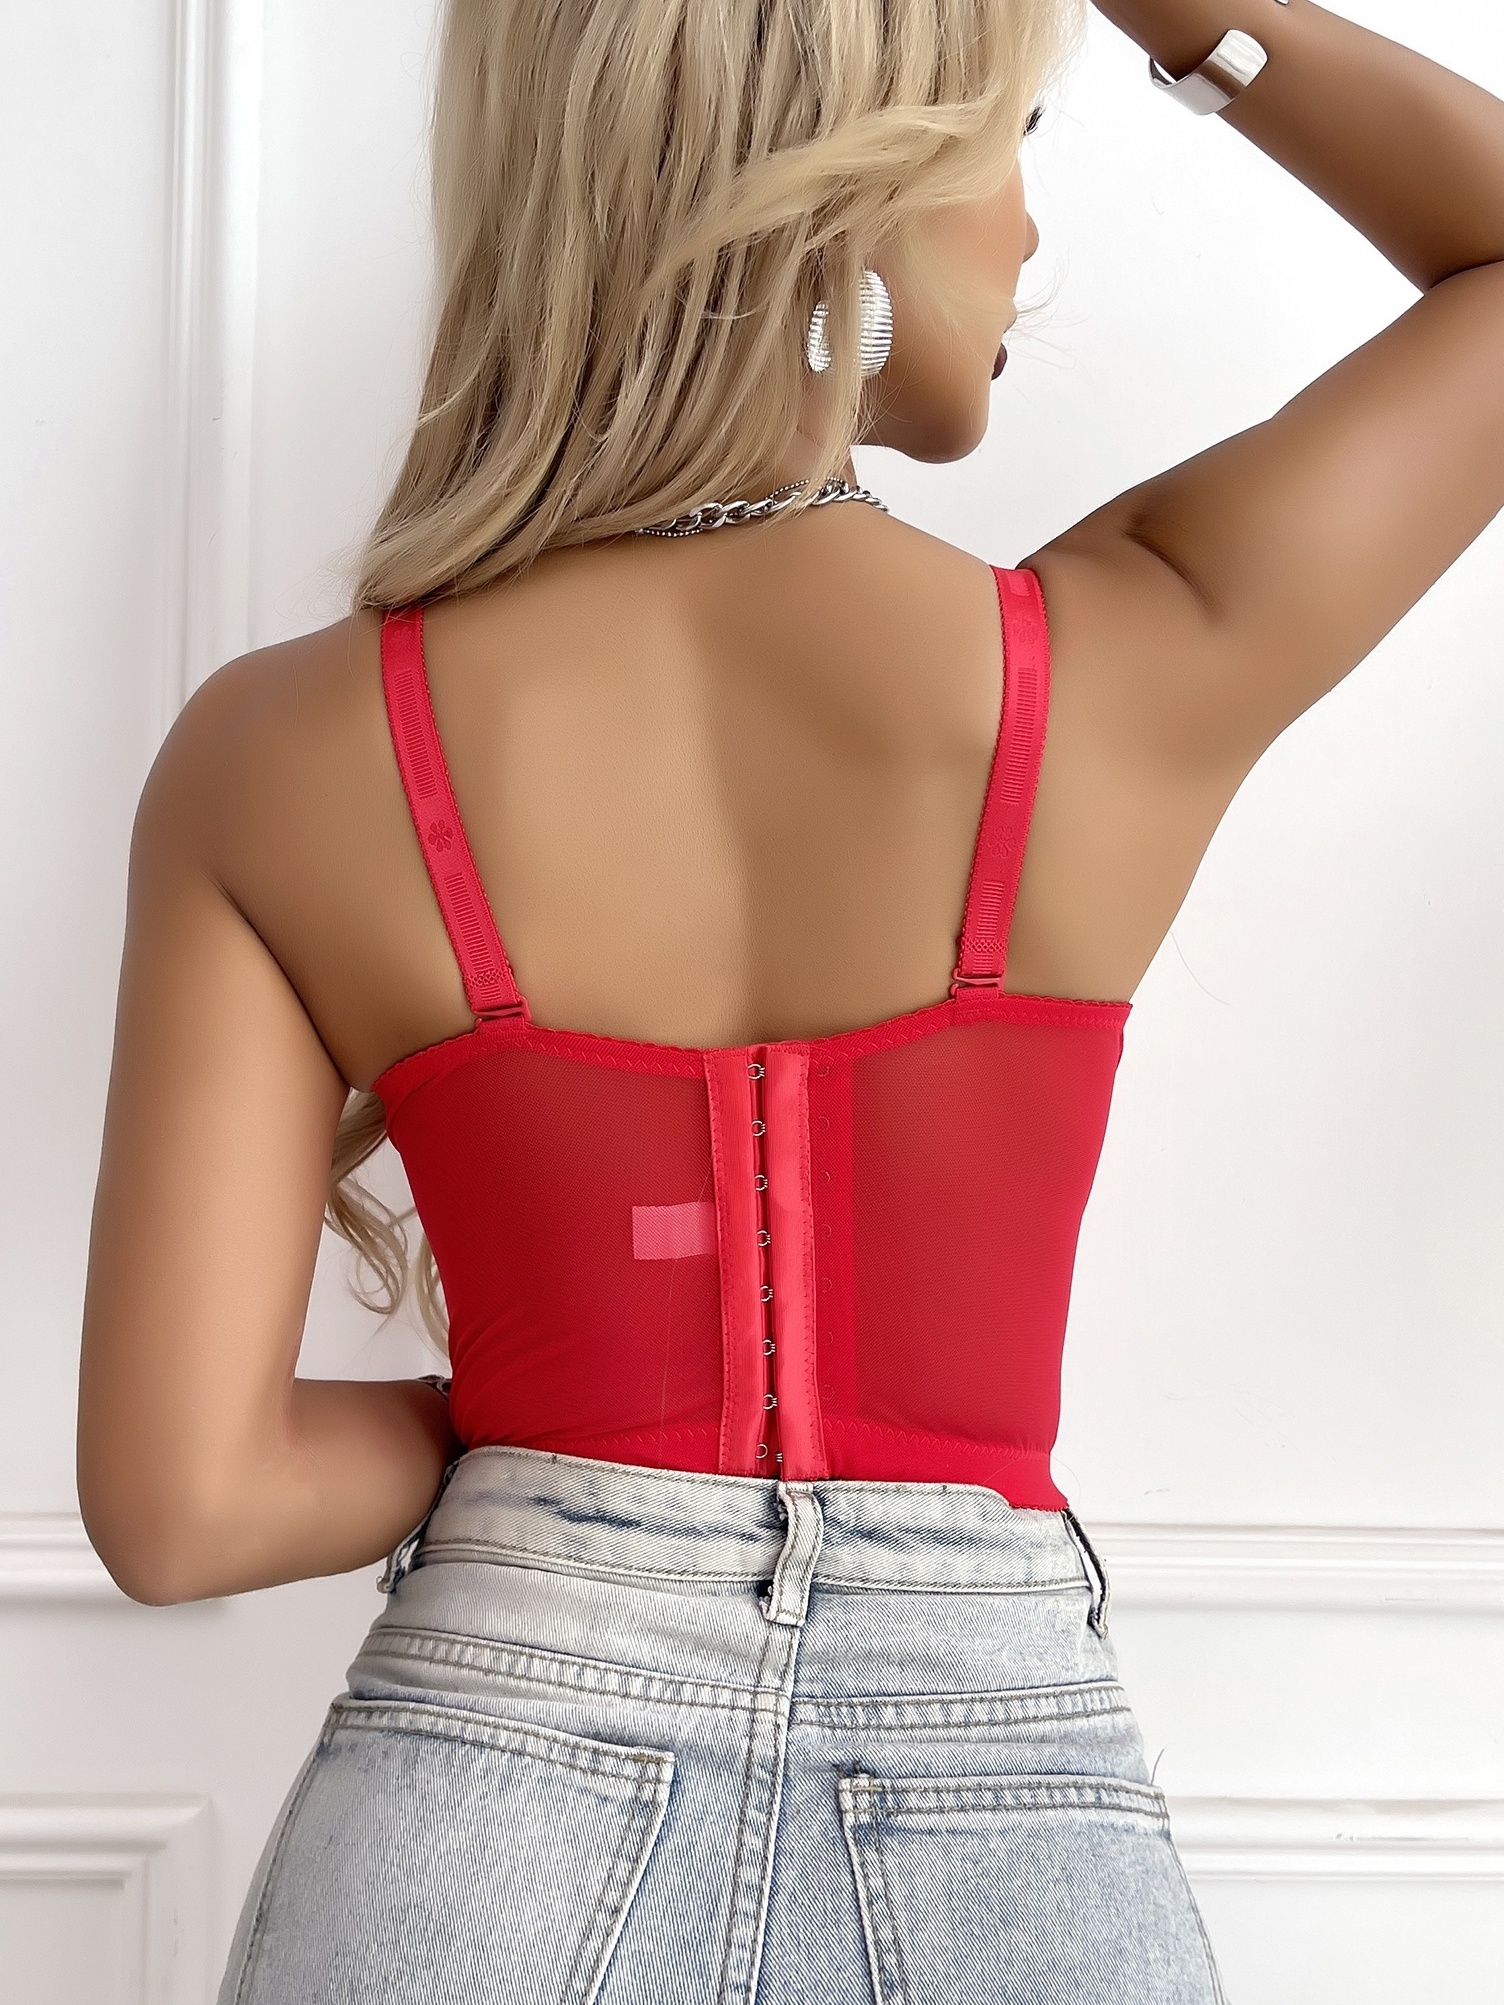 TQWQT Push Up Bra for Women Corset Top Bustier Padded Underwire Bra Add One  Cup,Red 38 